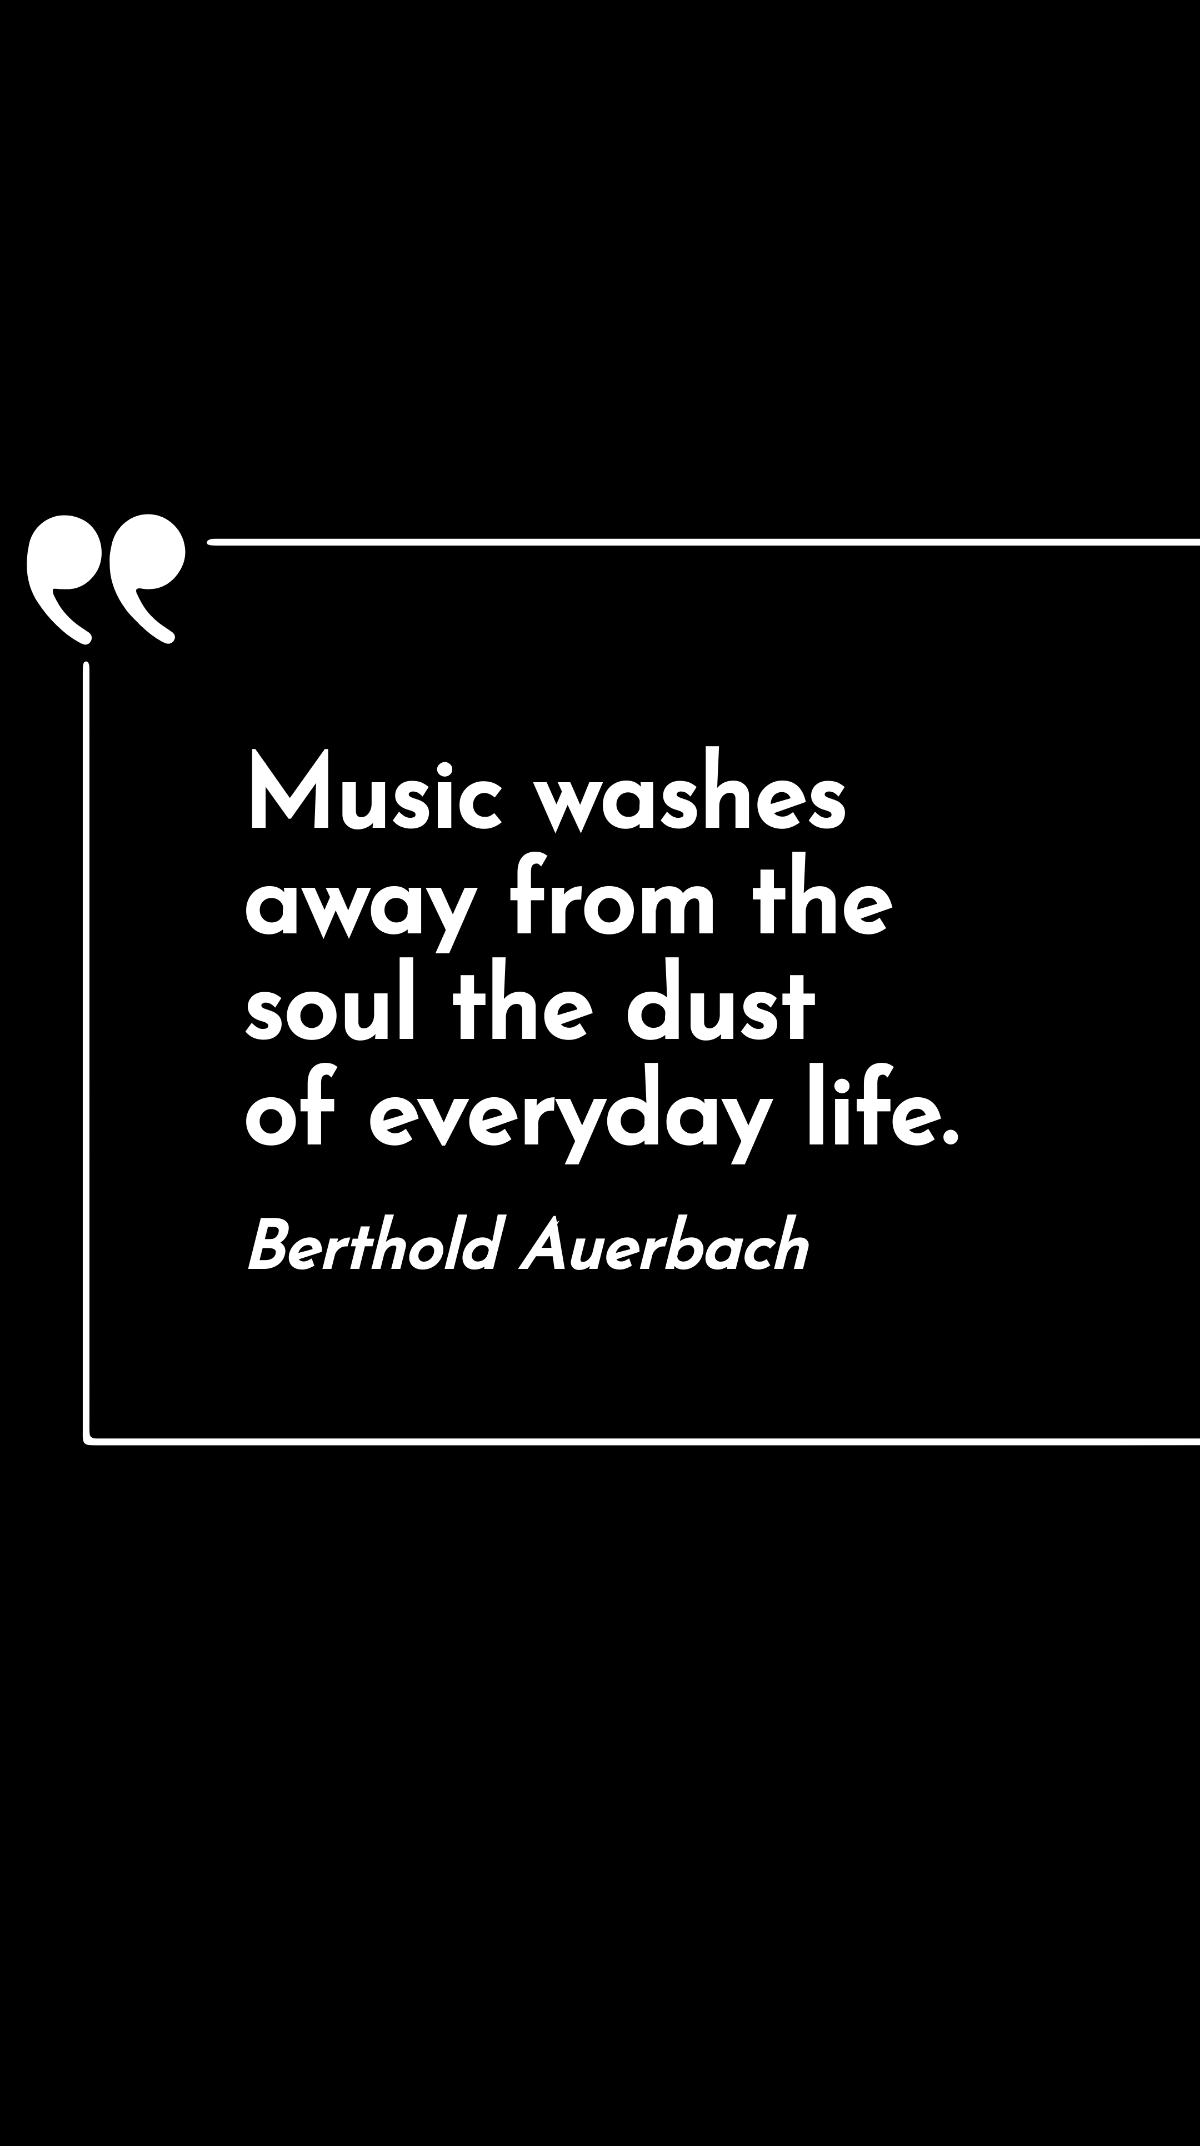 Berthold Auerbach - Music washes away from the soul the dust of everyday life. Template